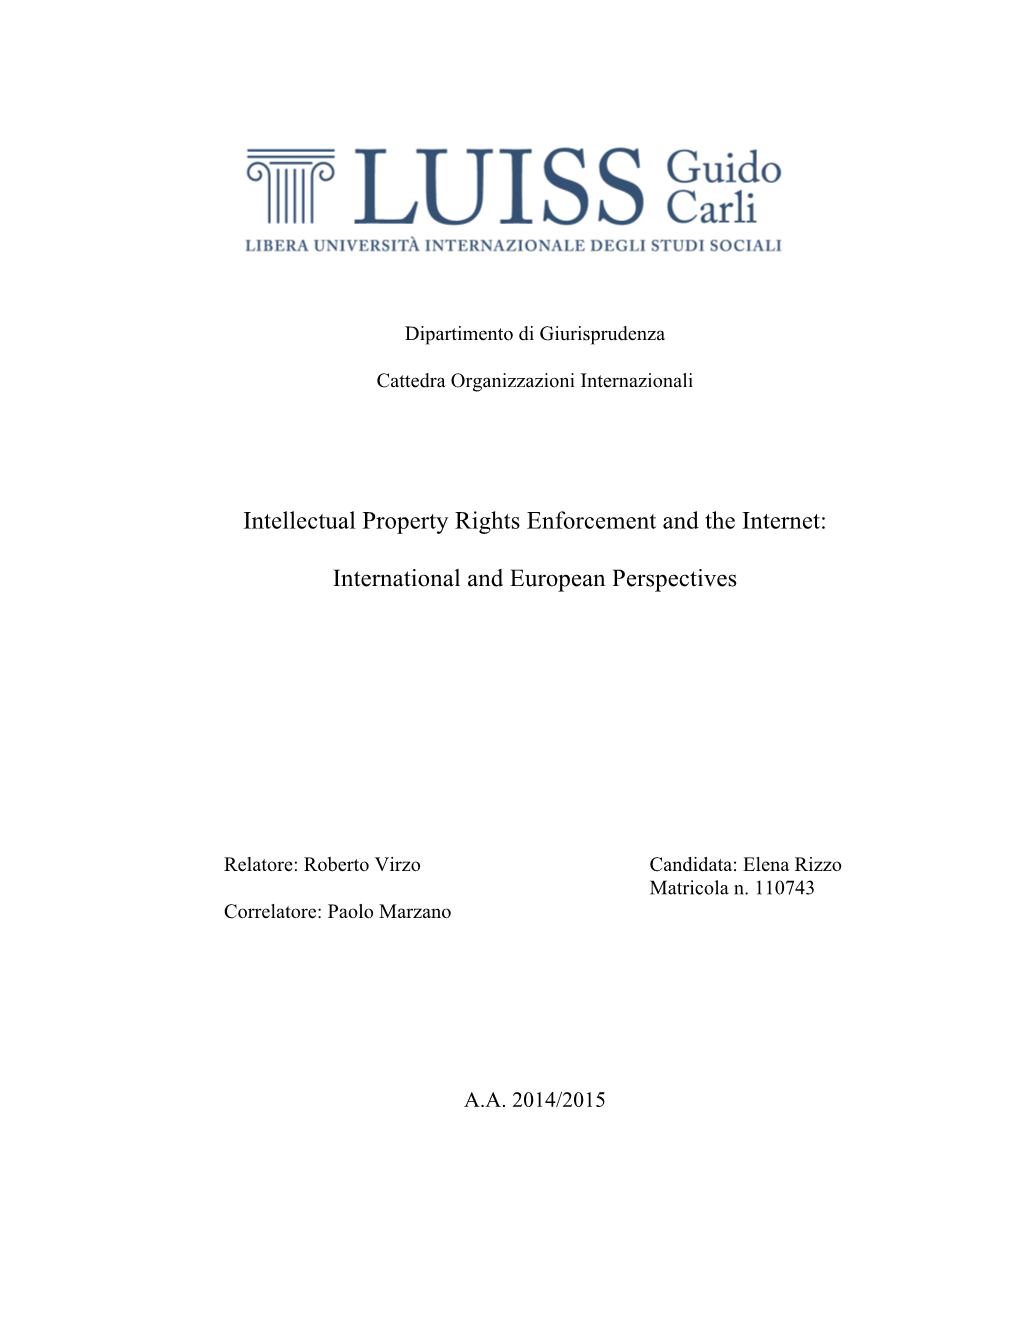 Intellectual Property Rights Enforcement and the Internet: International and European Perspectives